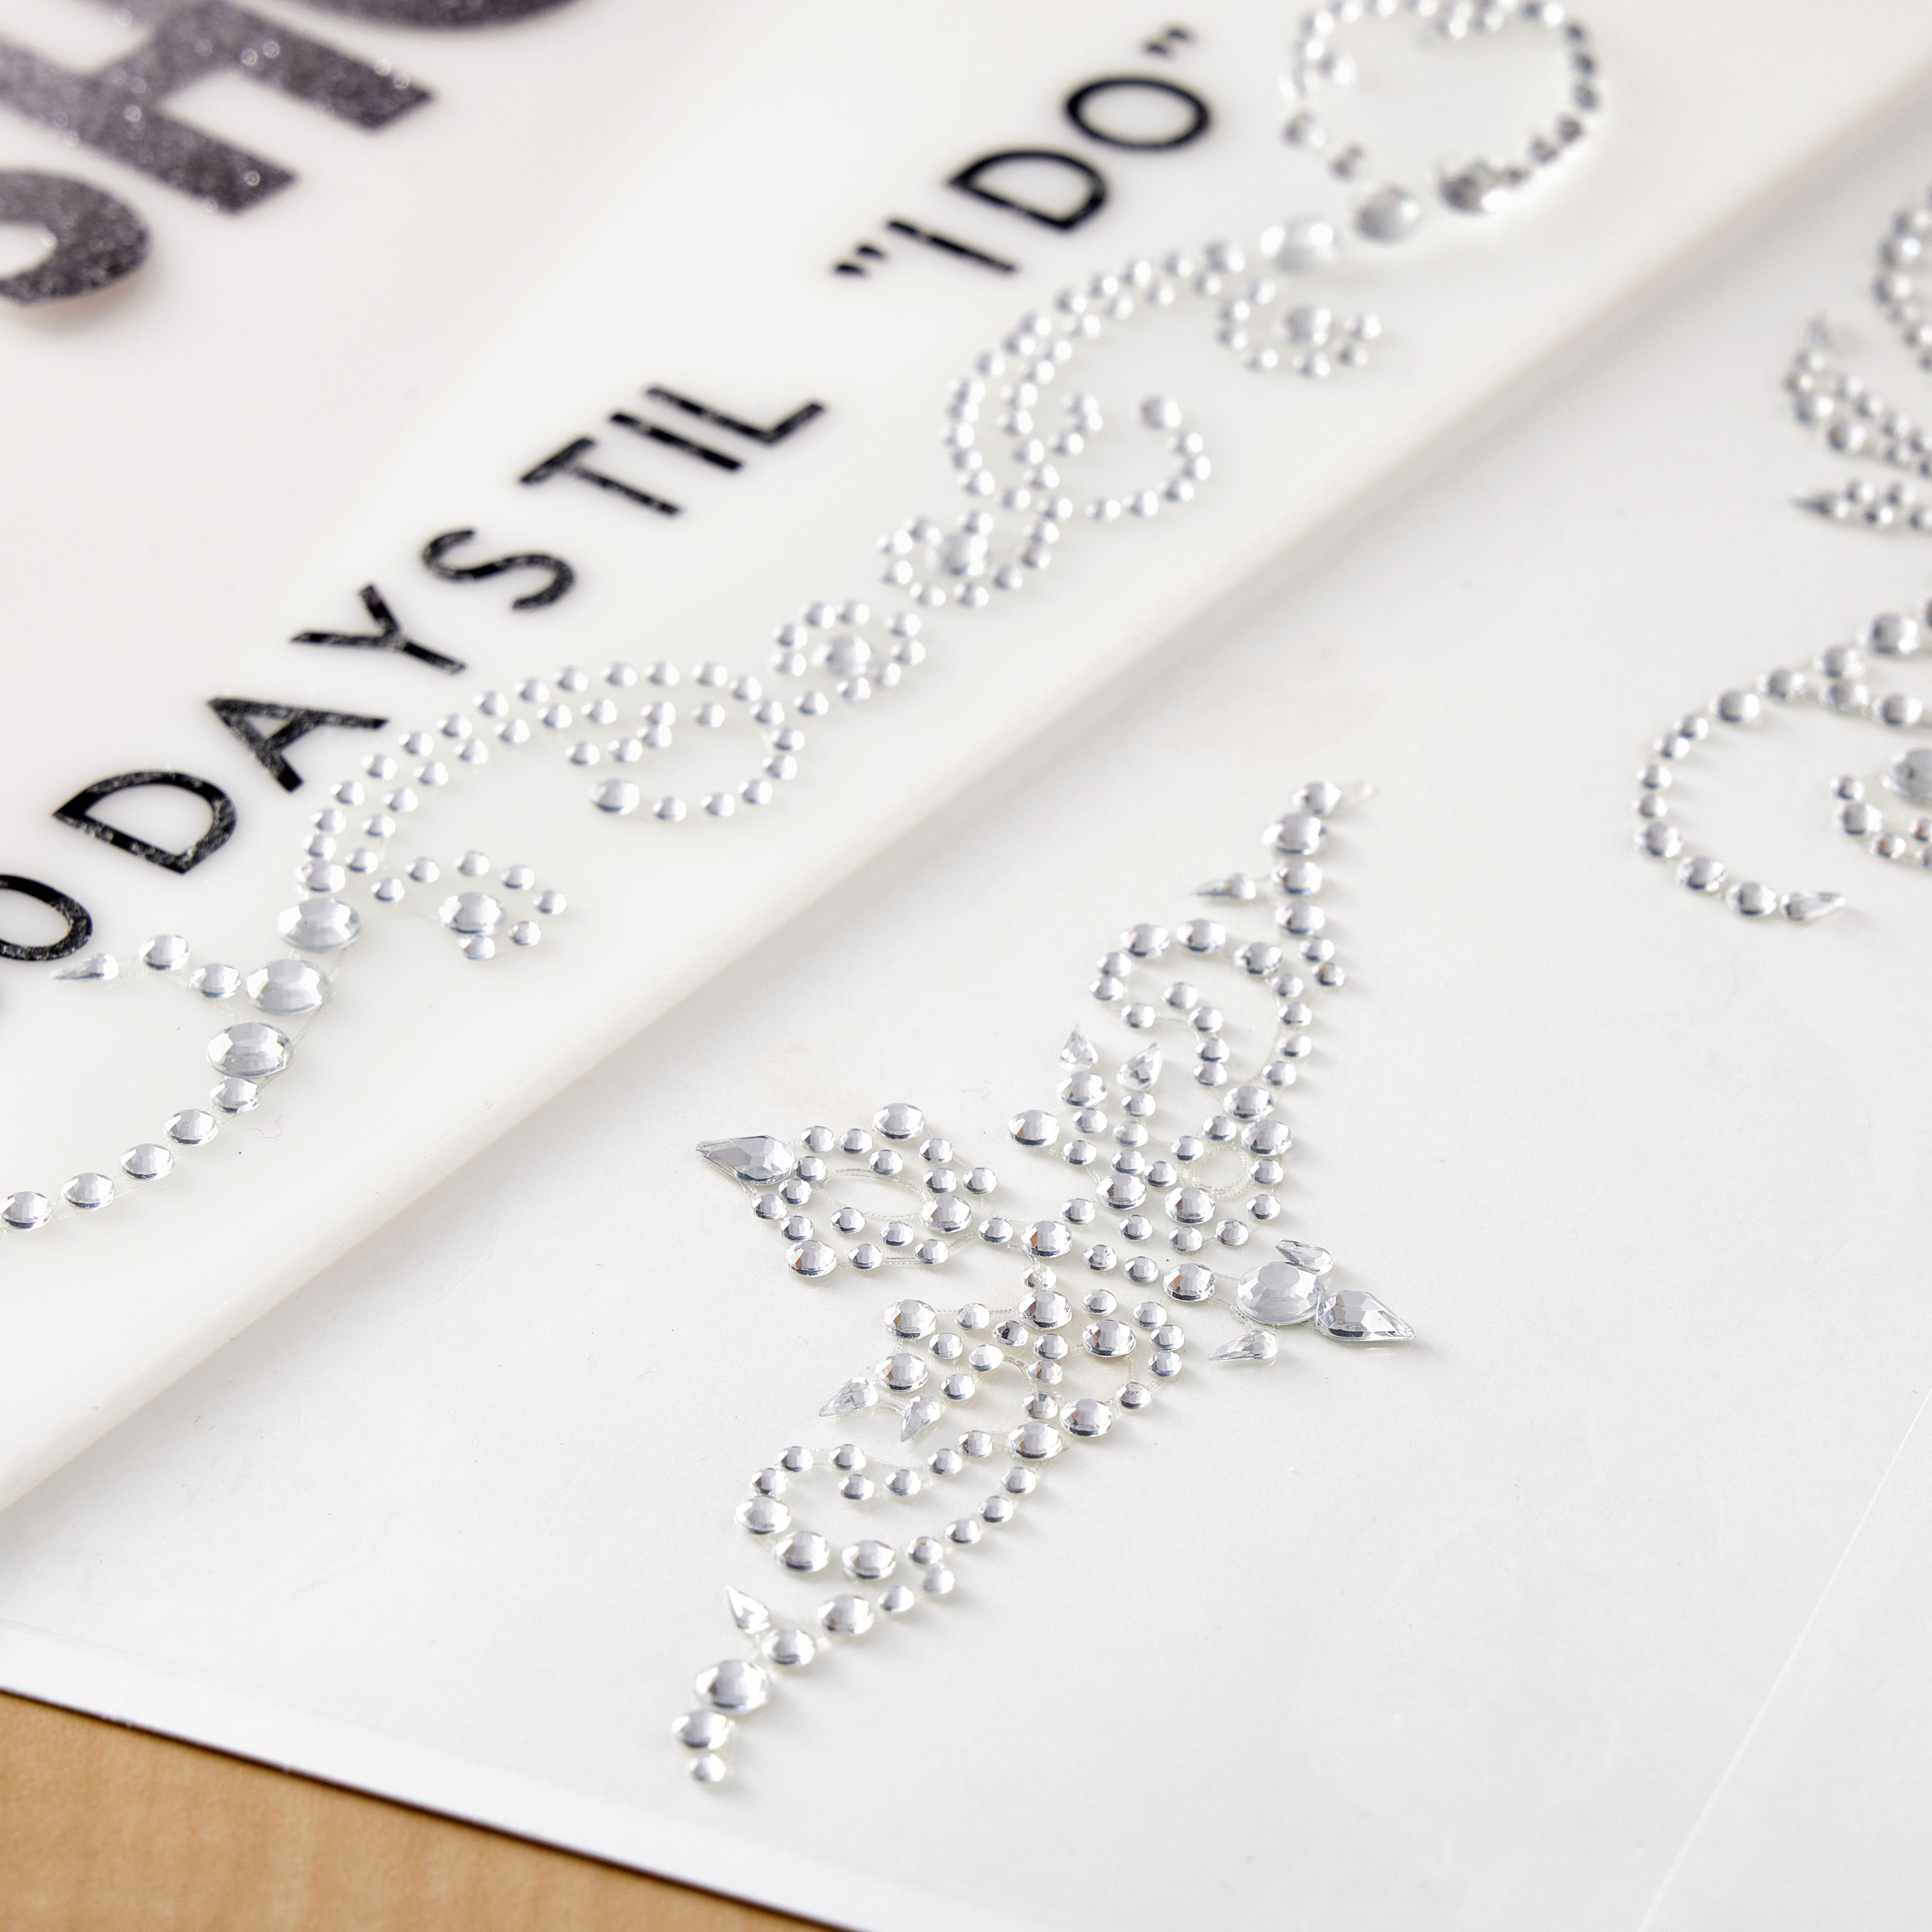 Recollections&#x2122; Adhesive Rhinestones, Small Clear Flourishes